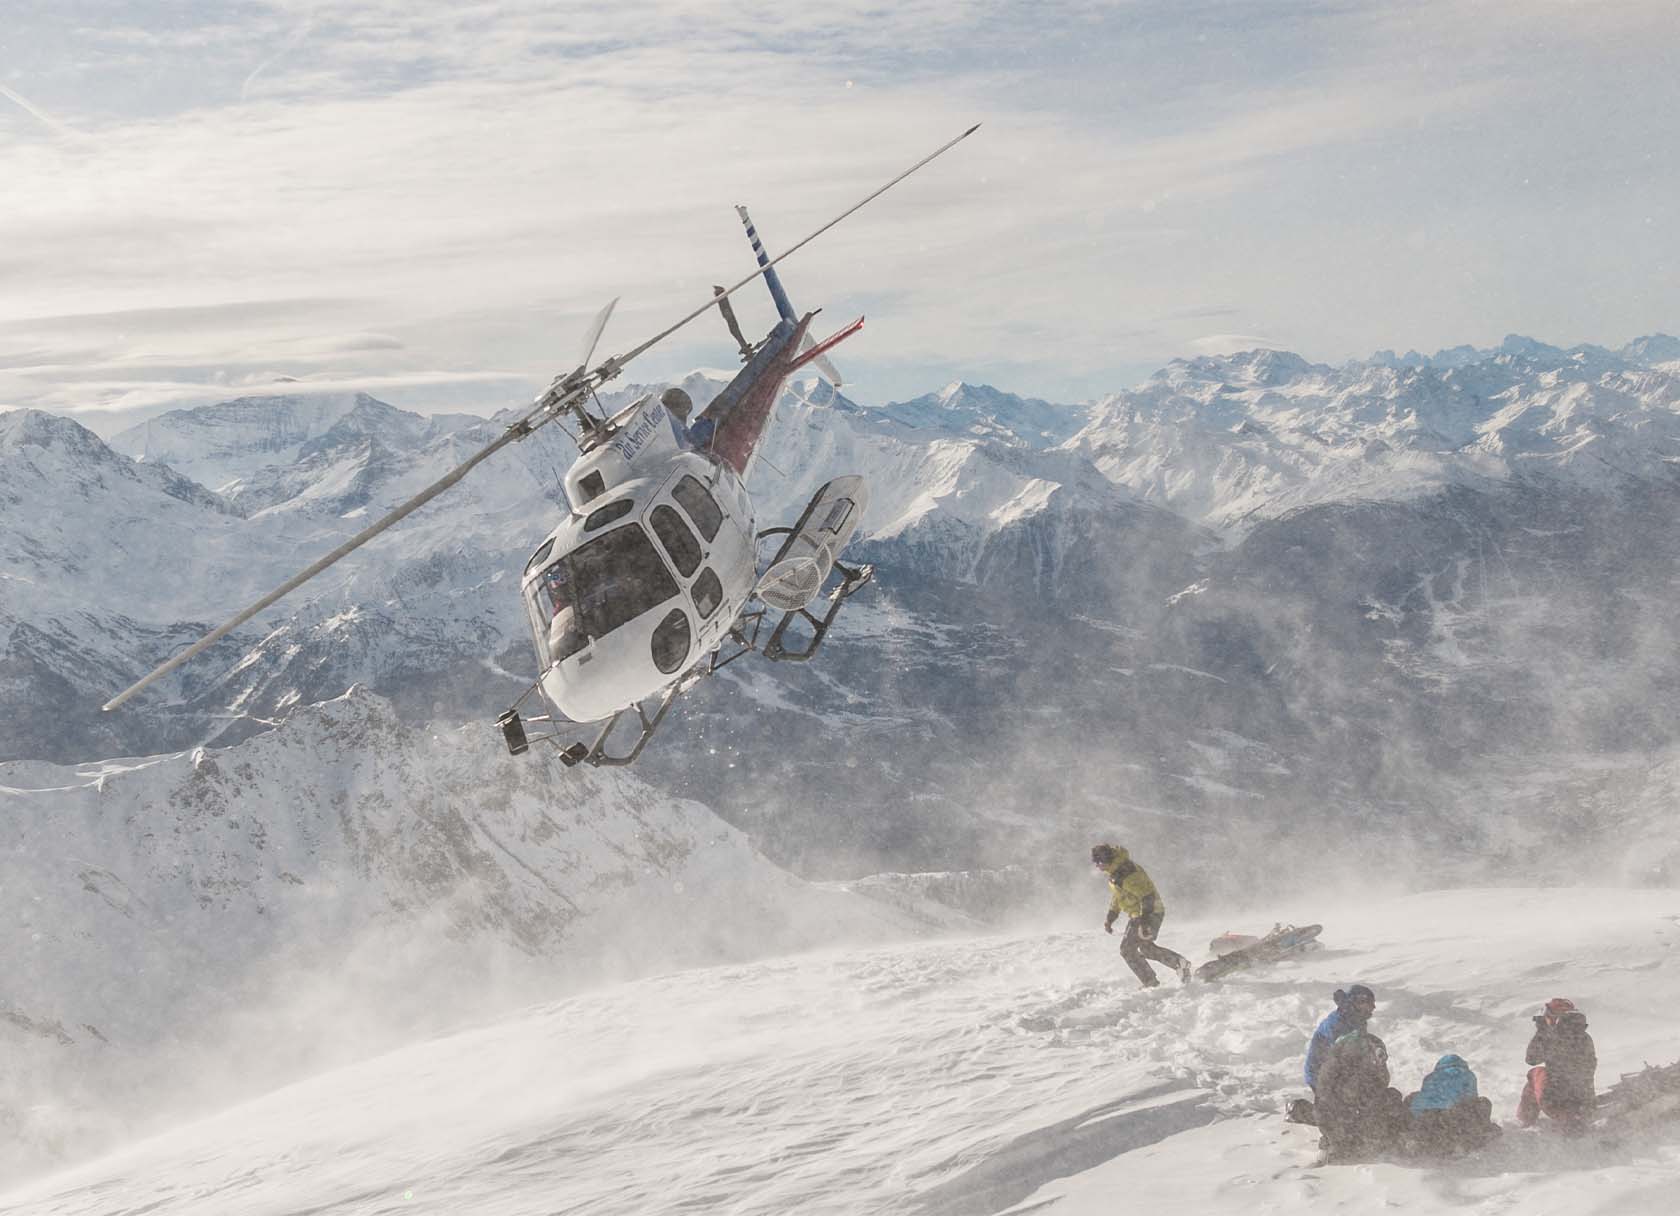 WE'RE TAKING BIG MOUNTAIN HELI SKIING TO THE ALPS - HERE'S HOW